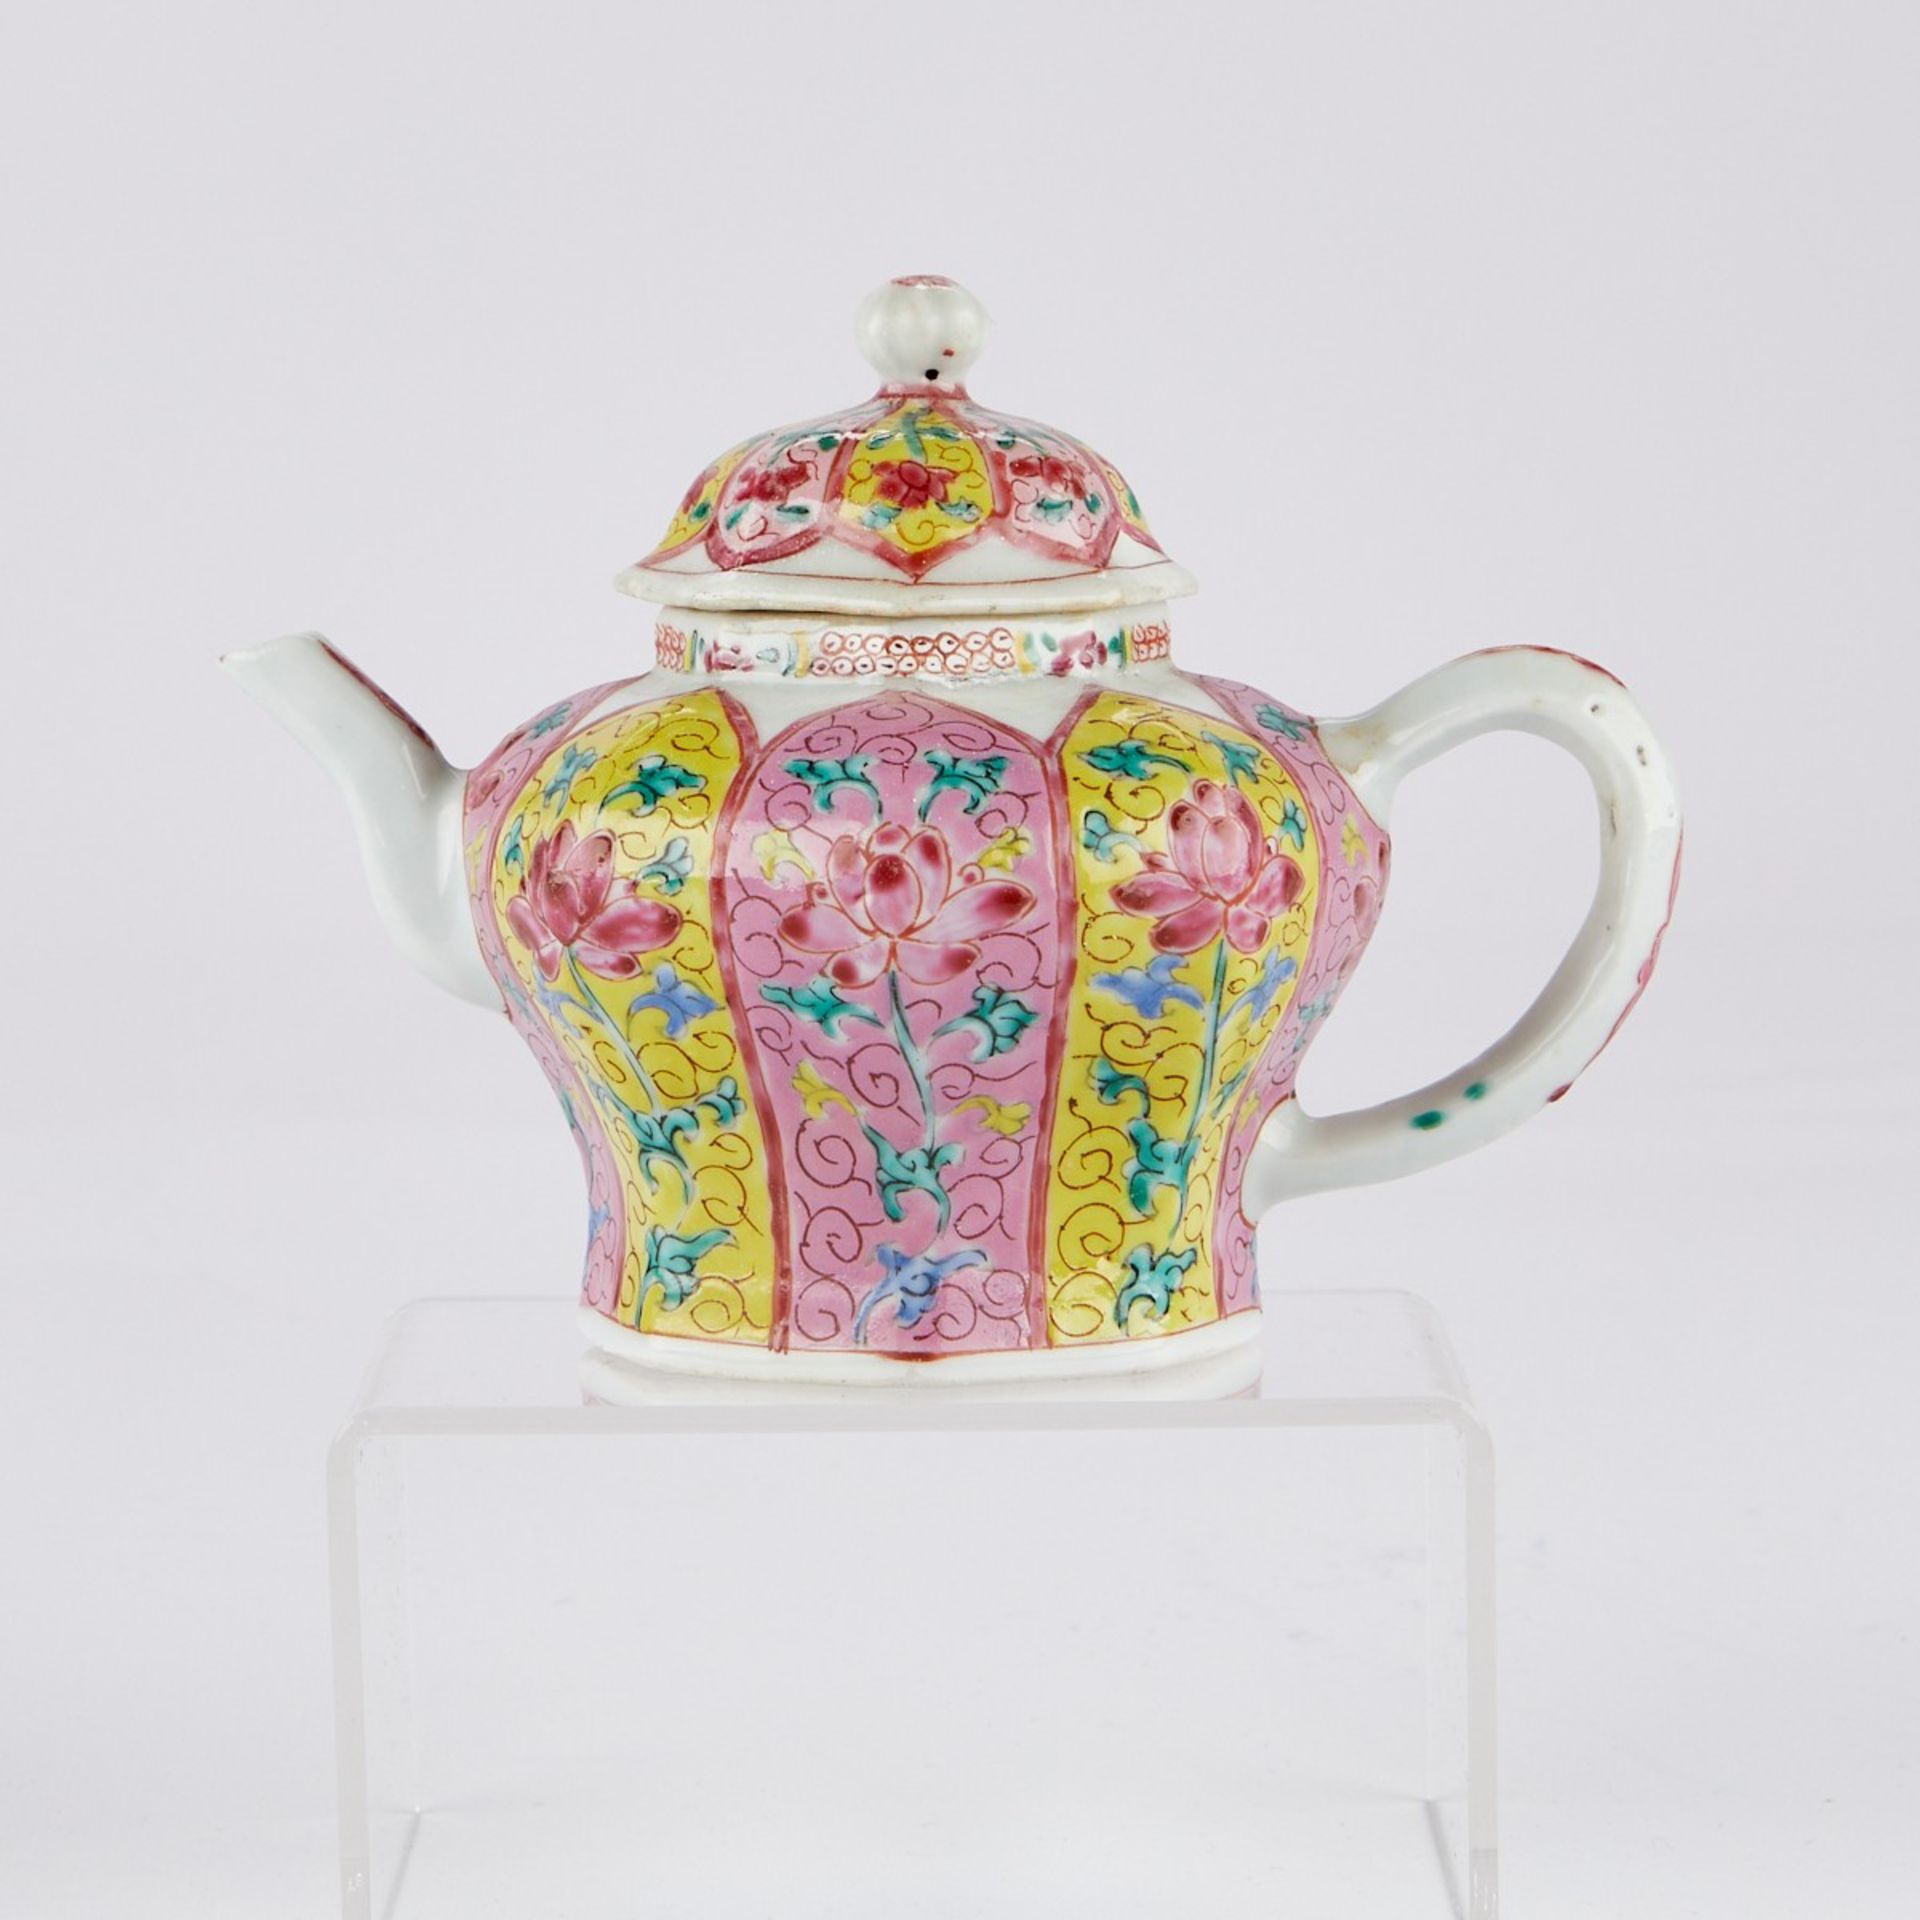 18th c. Chinese Export Porcelain Teapot and Undertray - Image 3 of 7